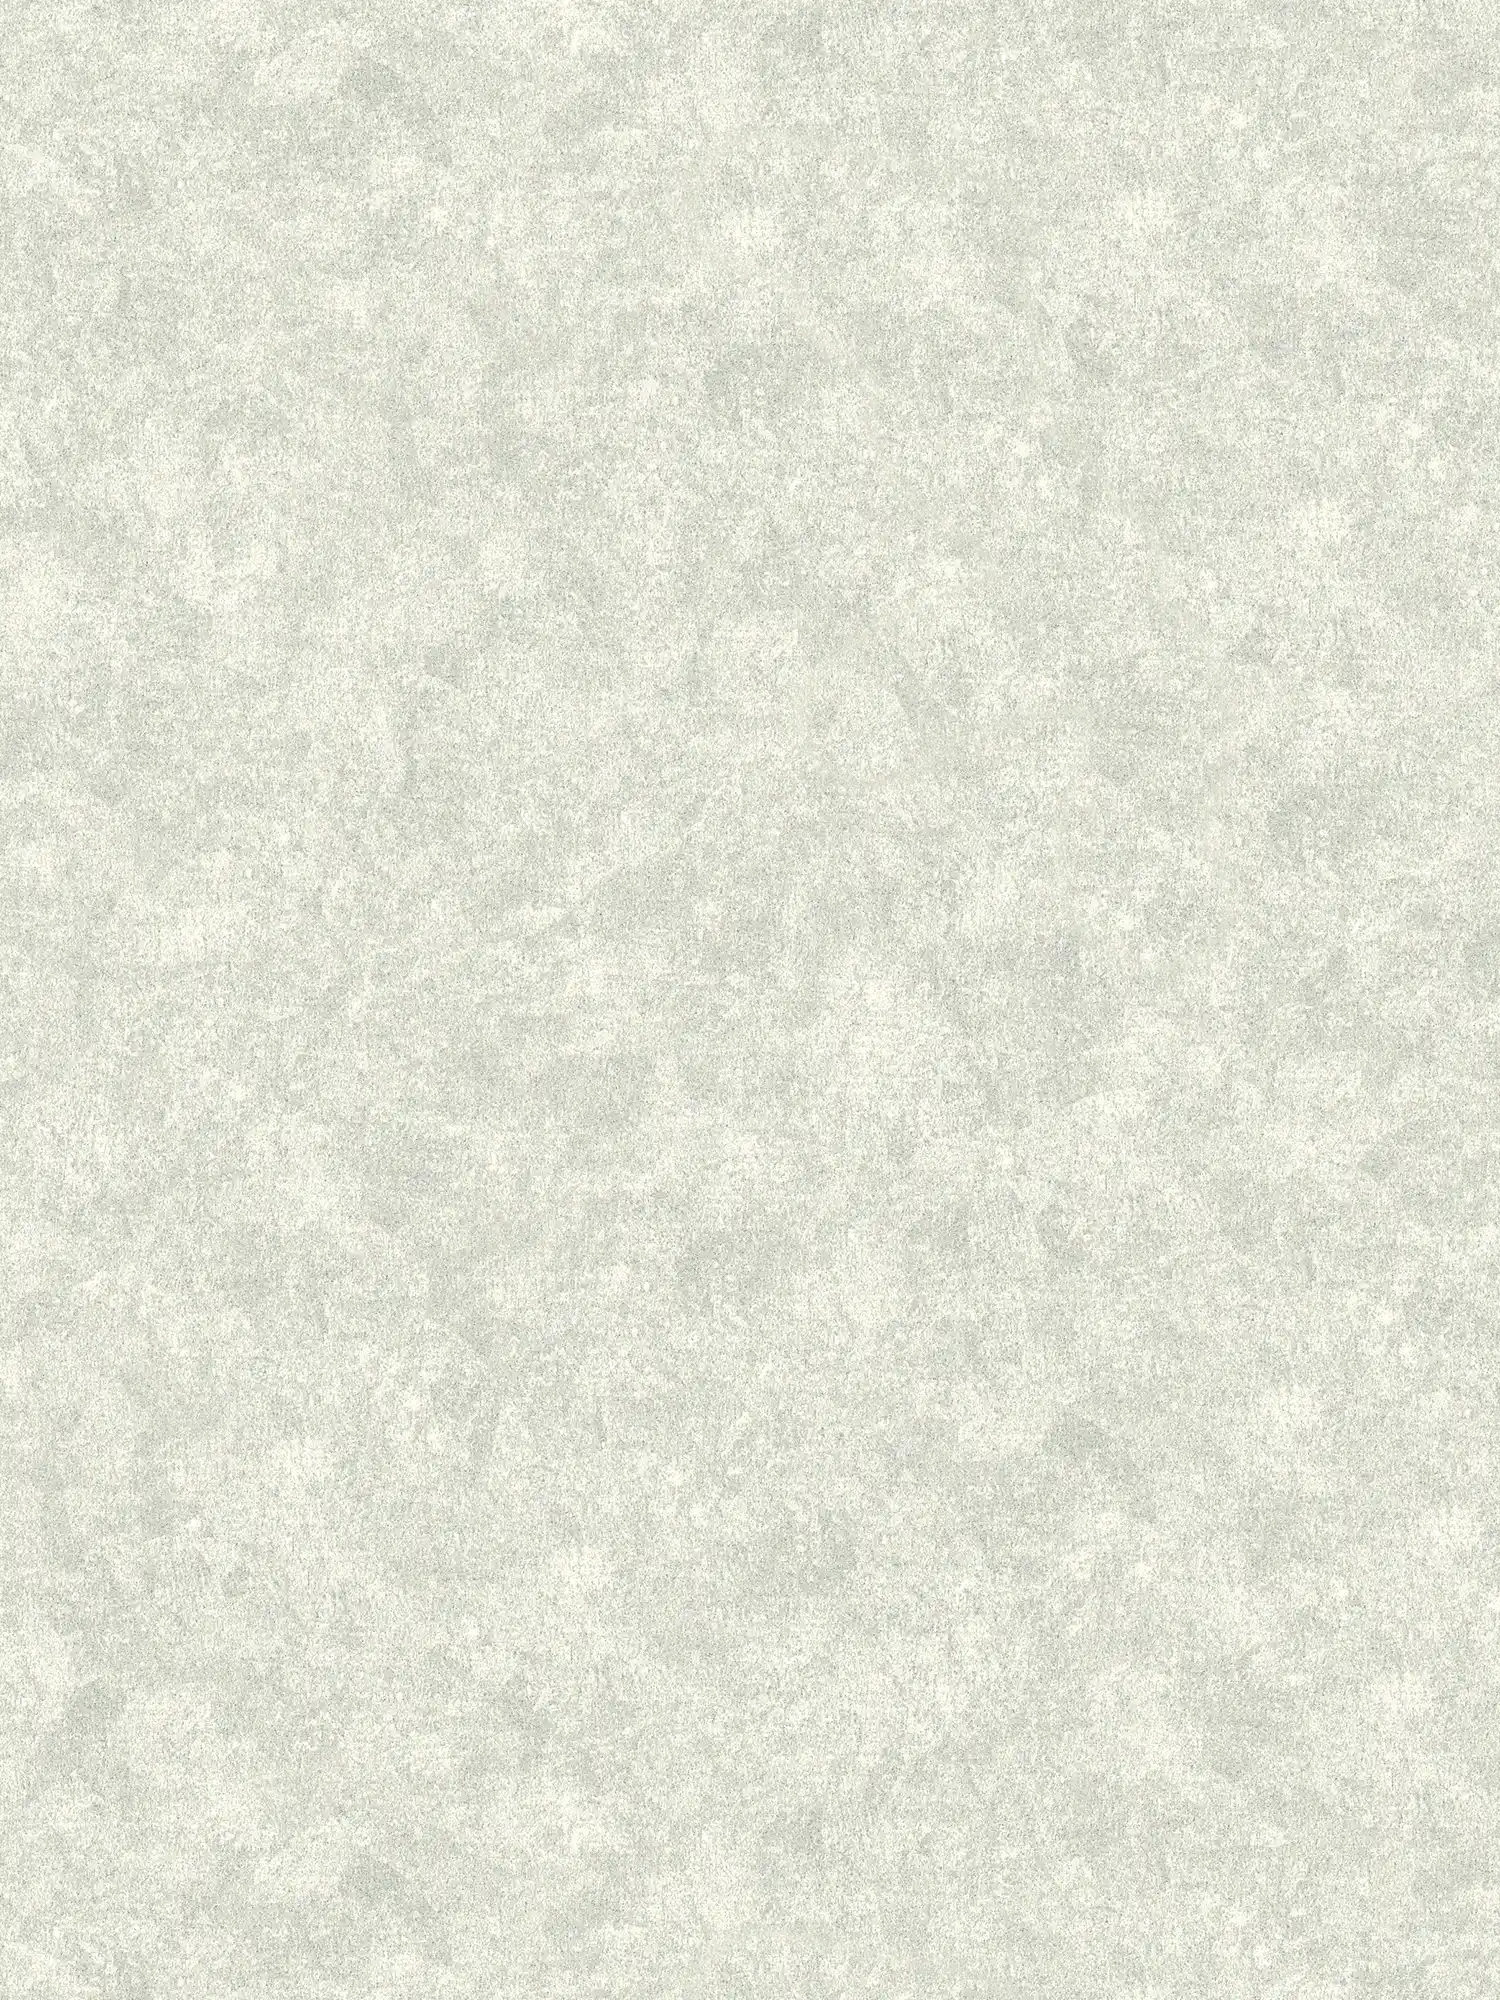 Plain wallpaper with mottled structure look - grey
